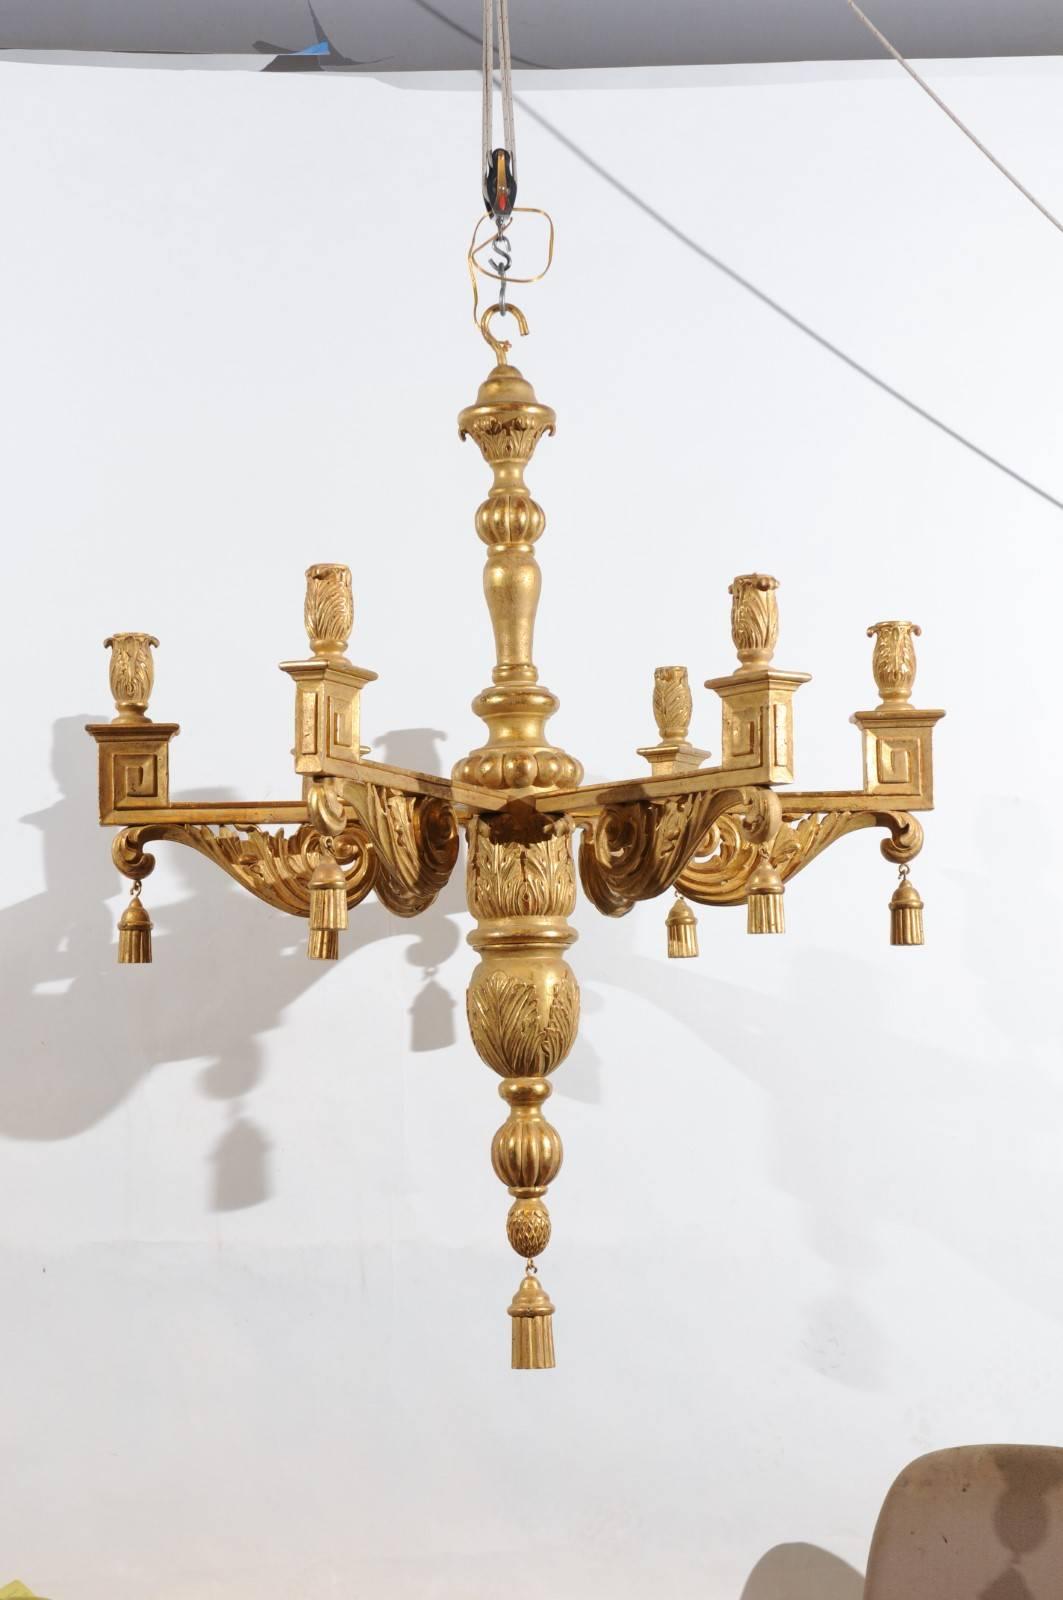 Hand-Carved Large Giltwood Neoclassical Chandelier with Tassels & 6 Lights For Sale